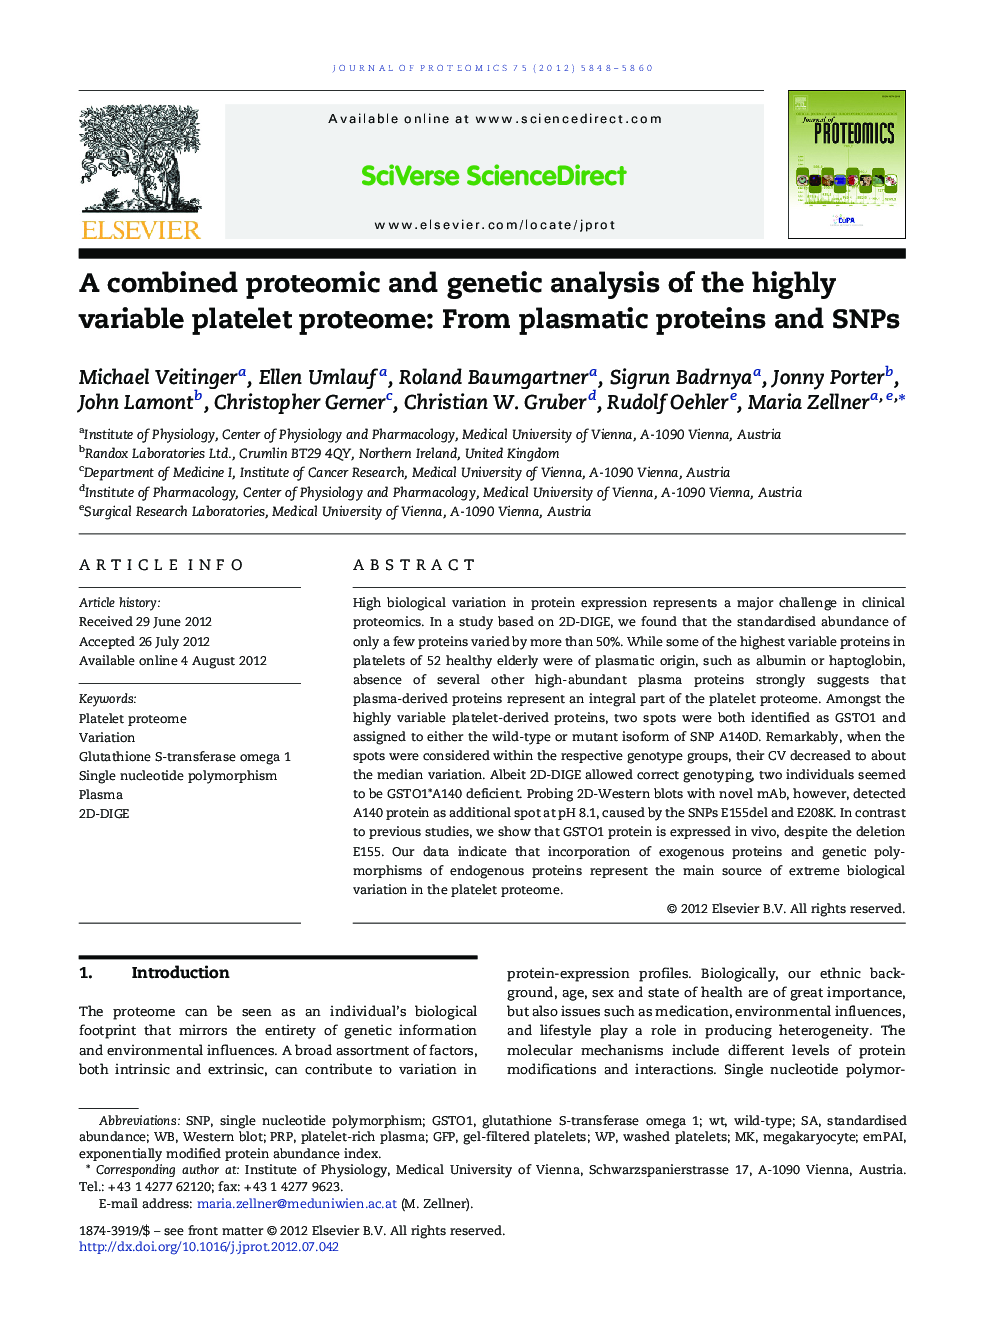 A combined proteomic and genetic analysis of the highly variable platelet proteome: From plasmatic proteins and SNPs